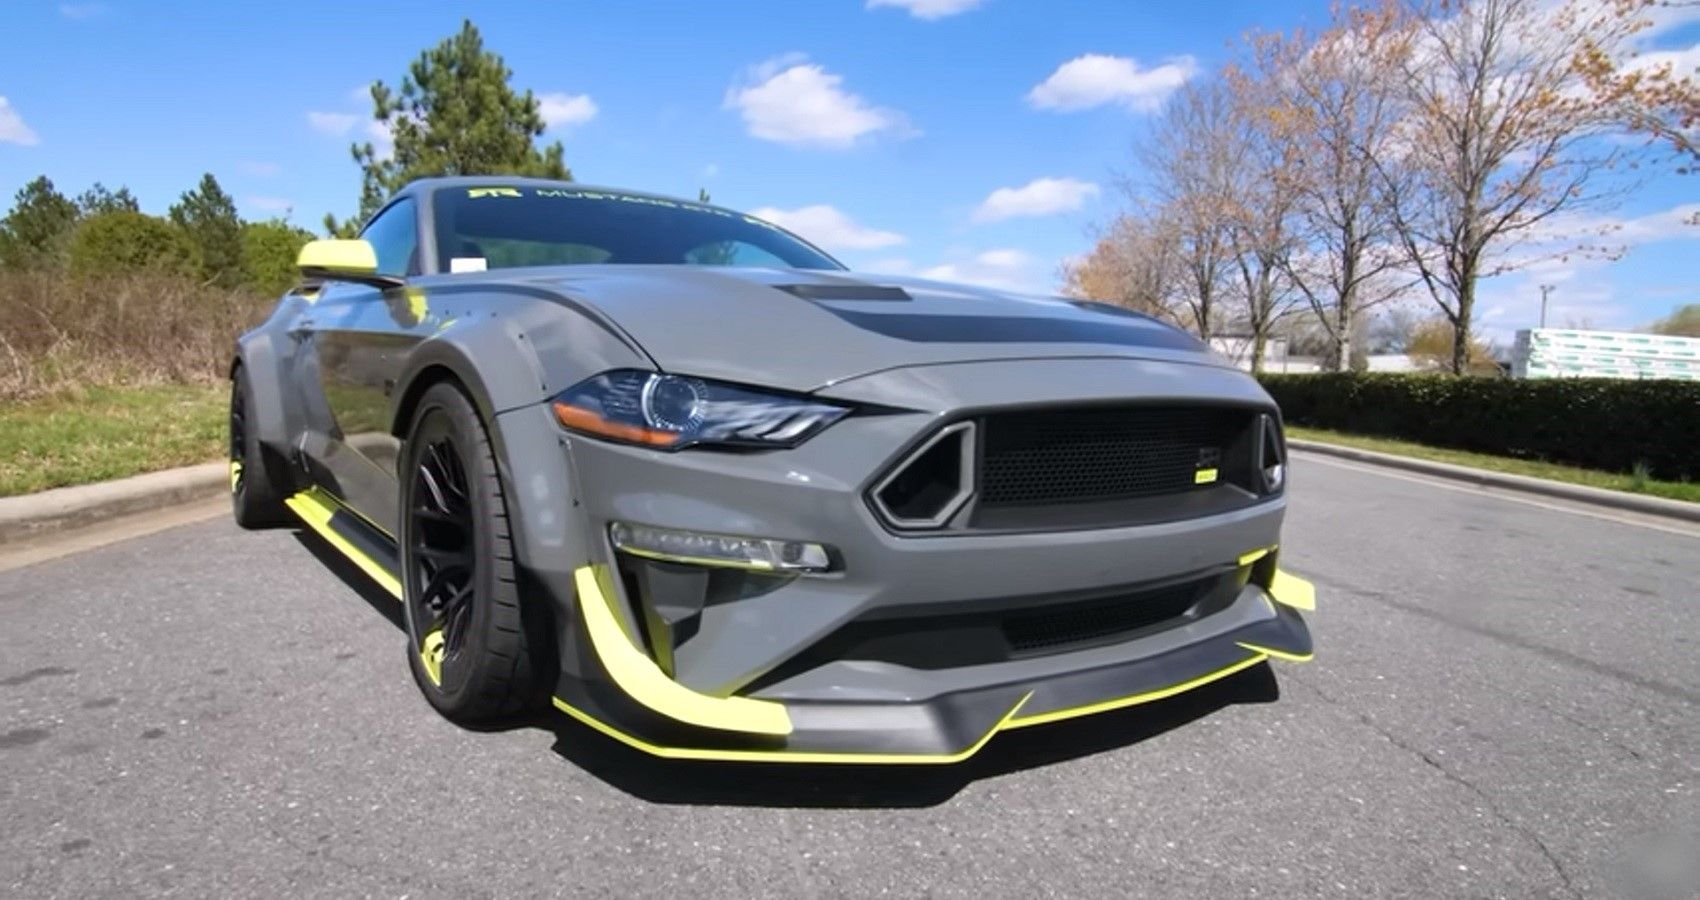 This 750-HP, RTR Spec 5 Mustang Could Be The Ultimate Ford Mustang So Far